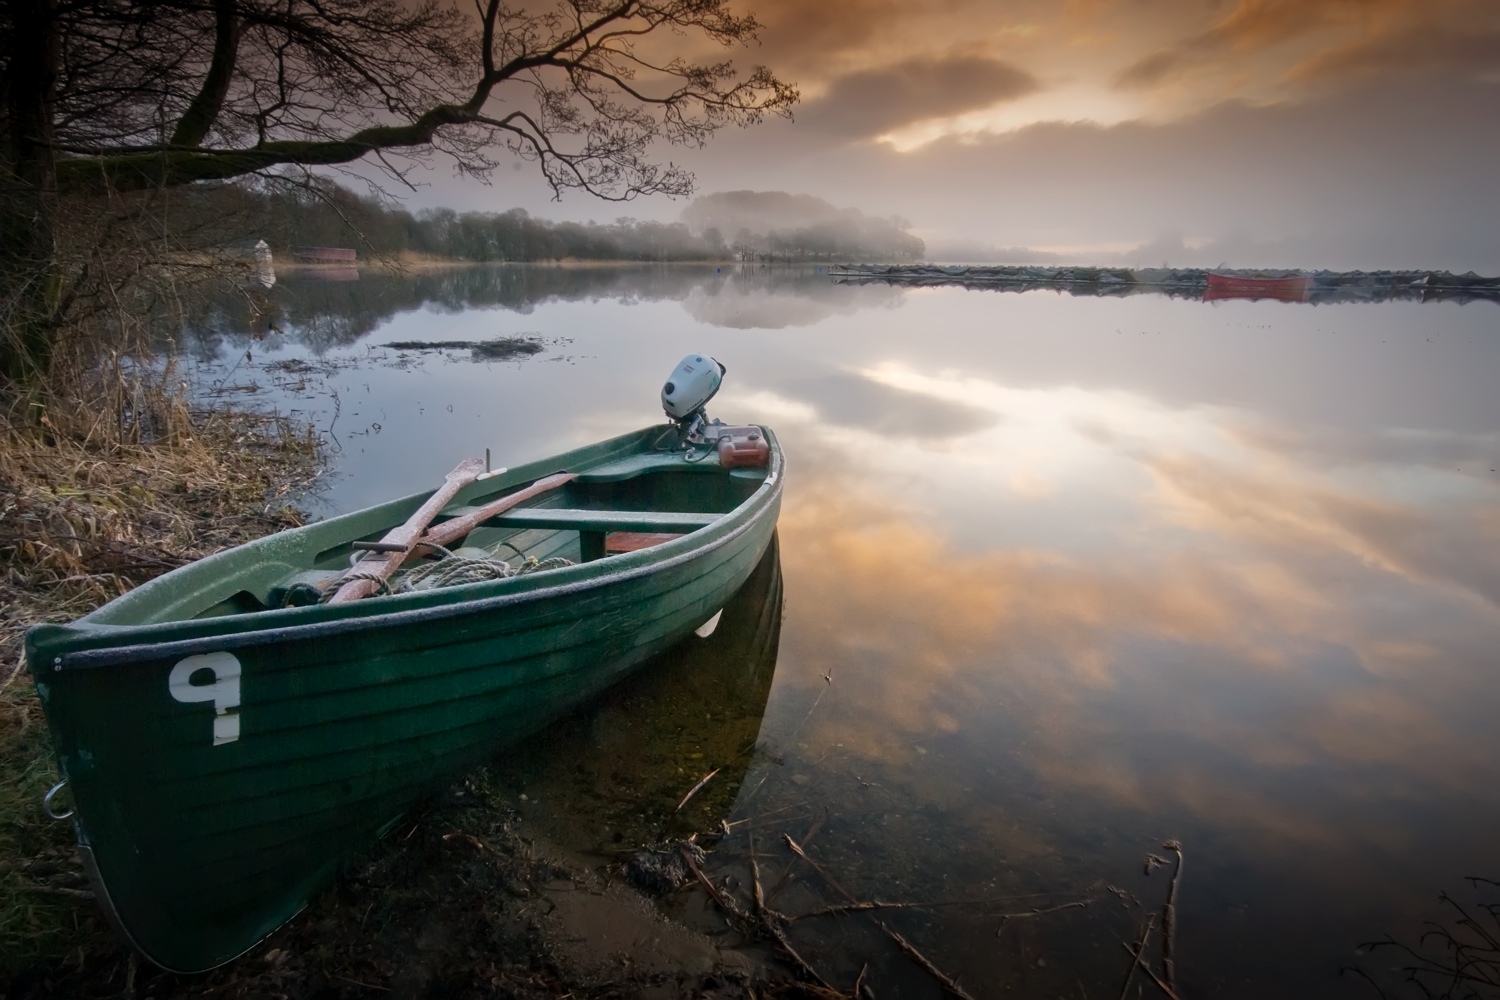 Lake of Menteith, Trossachs